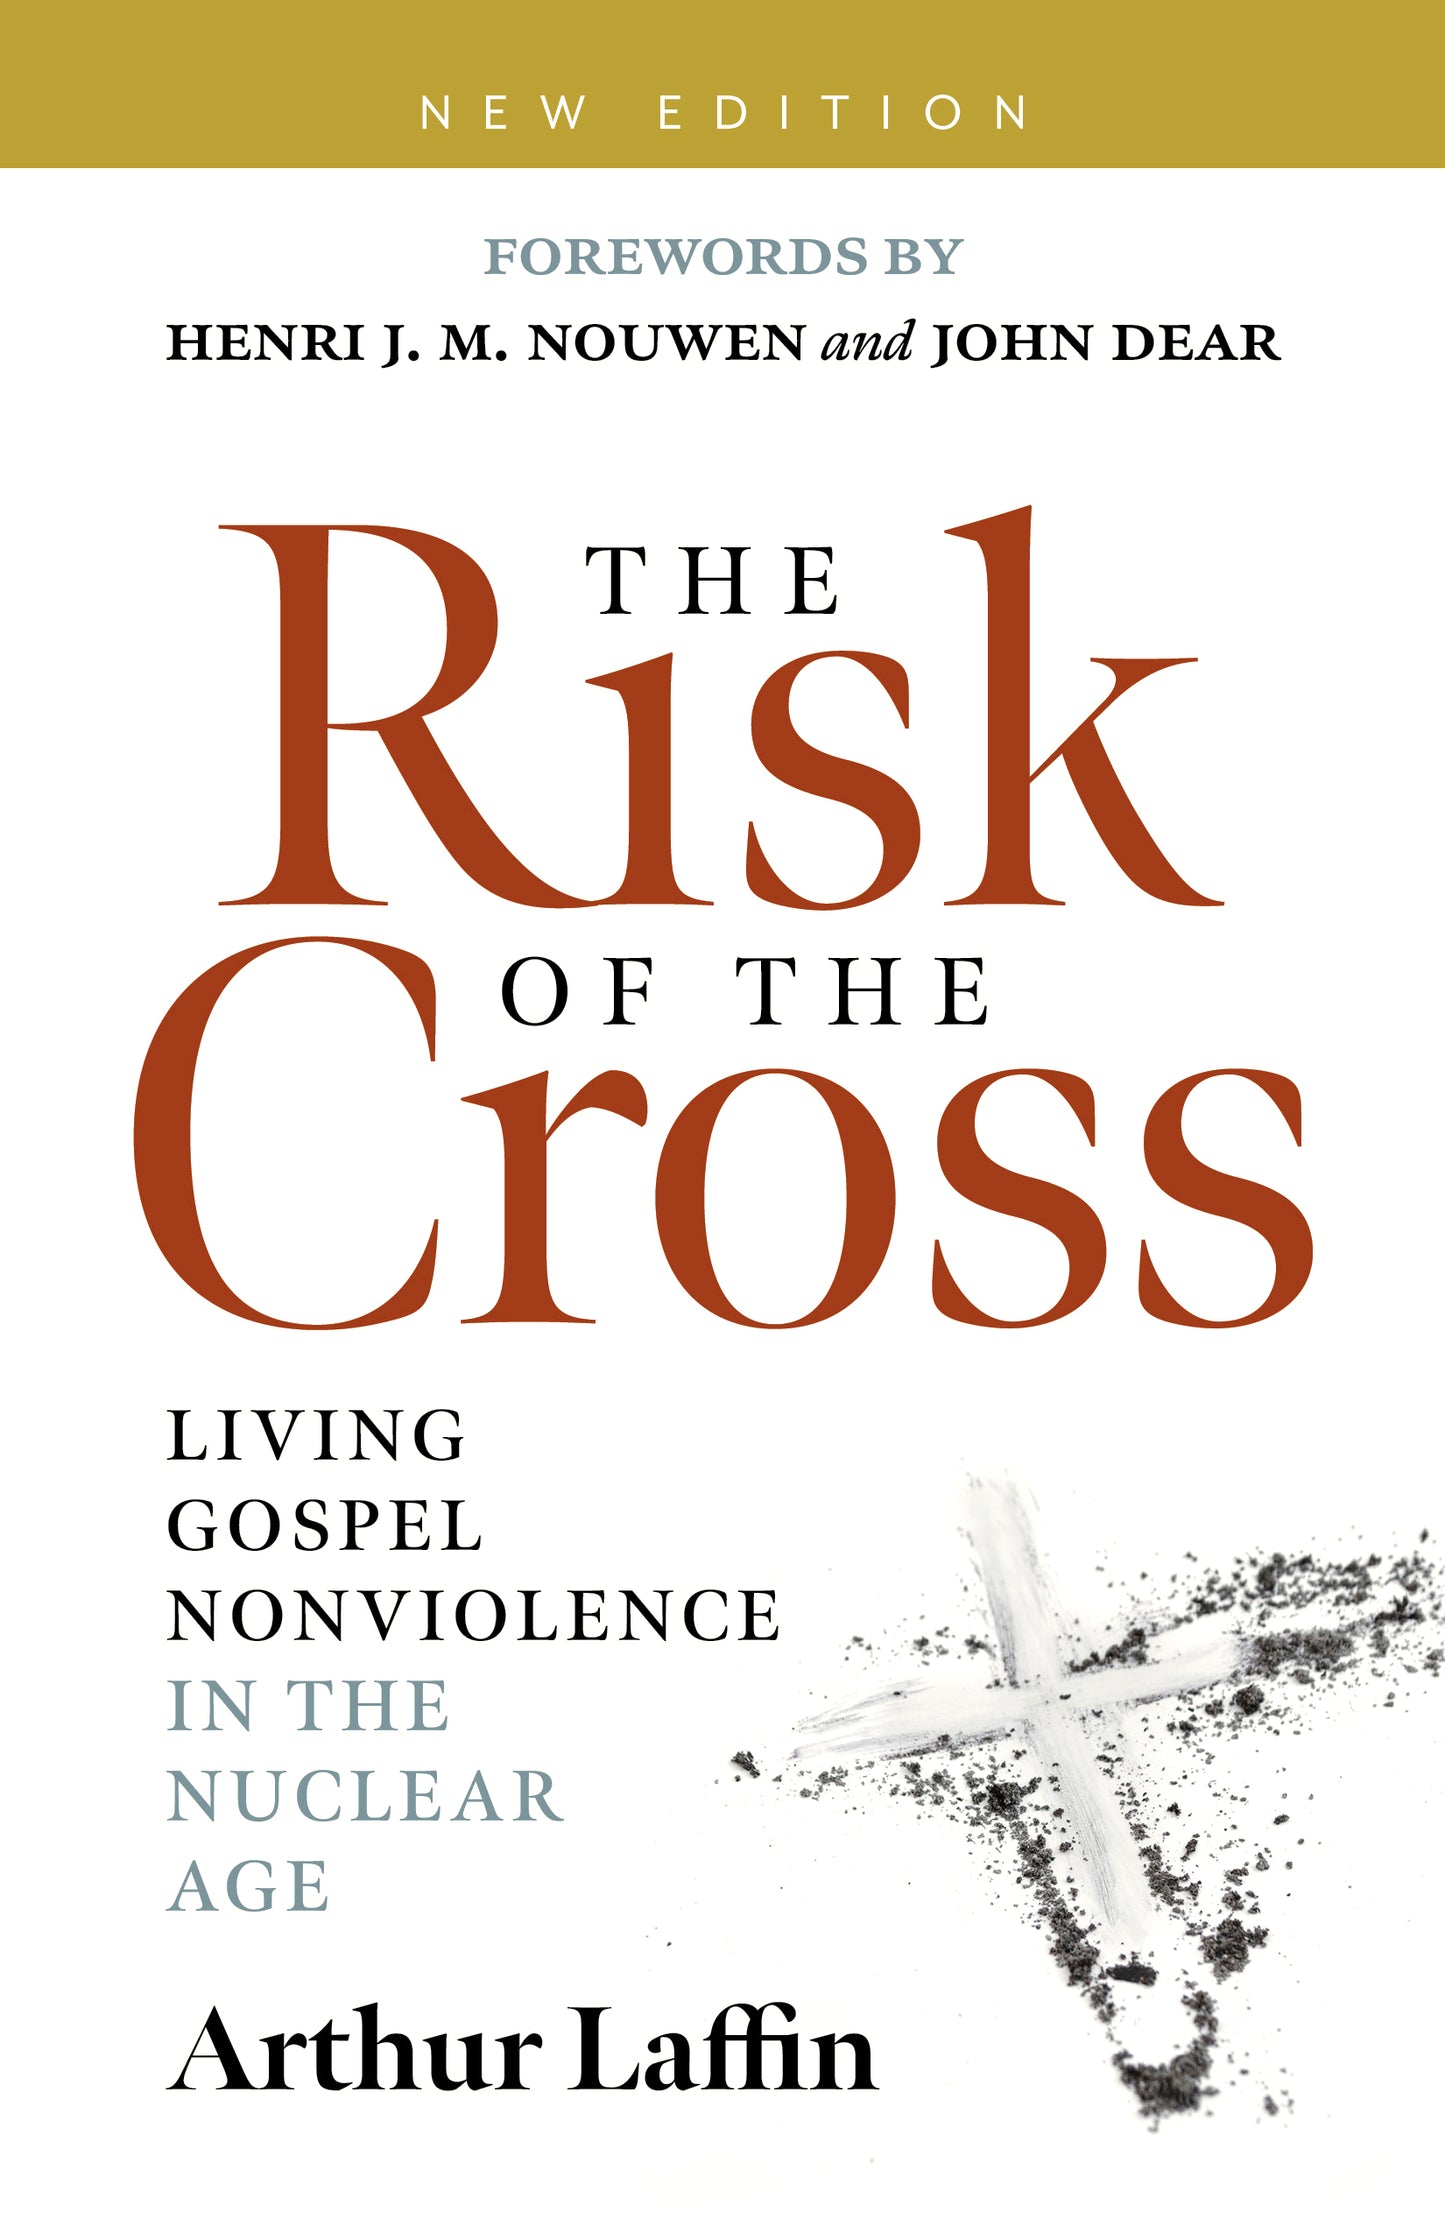 The Risk of the Cross